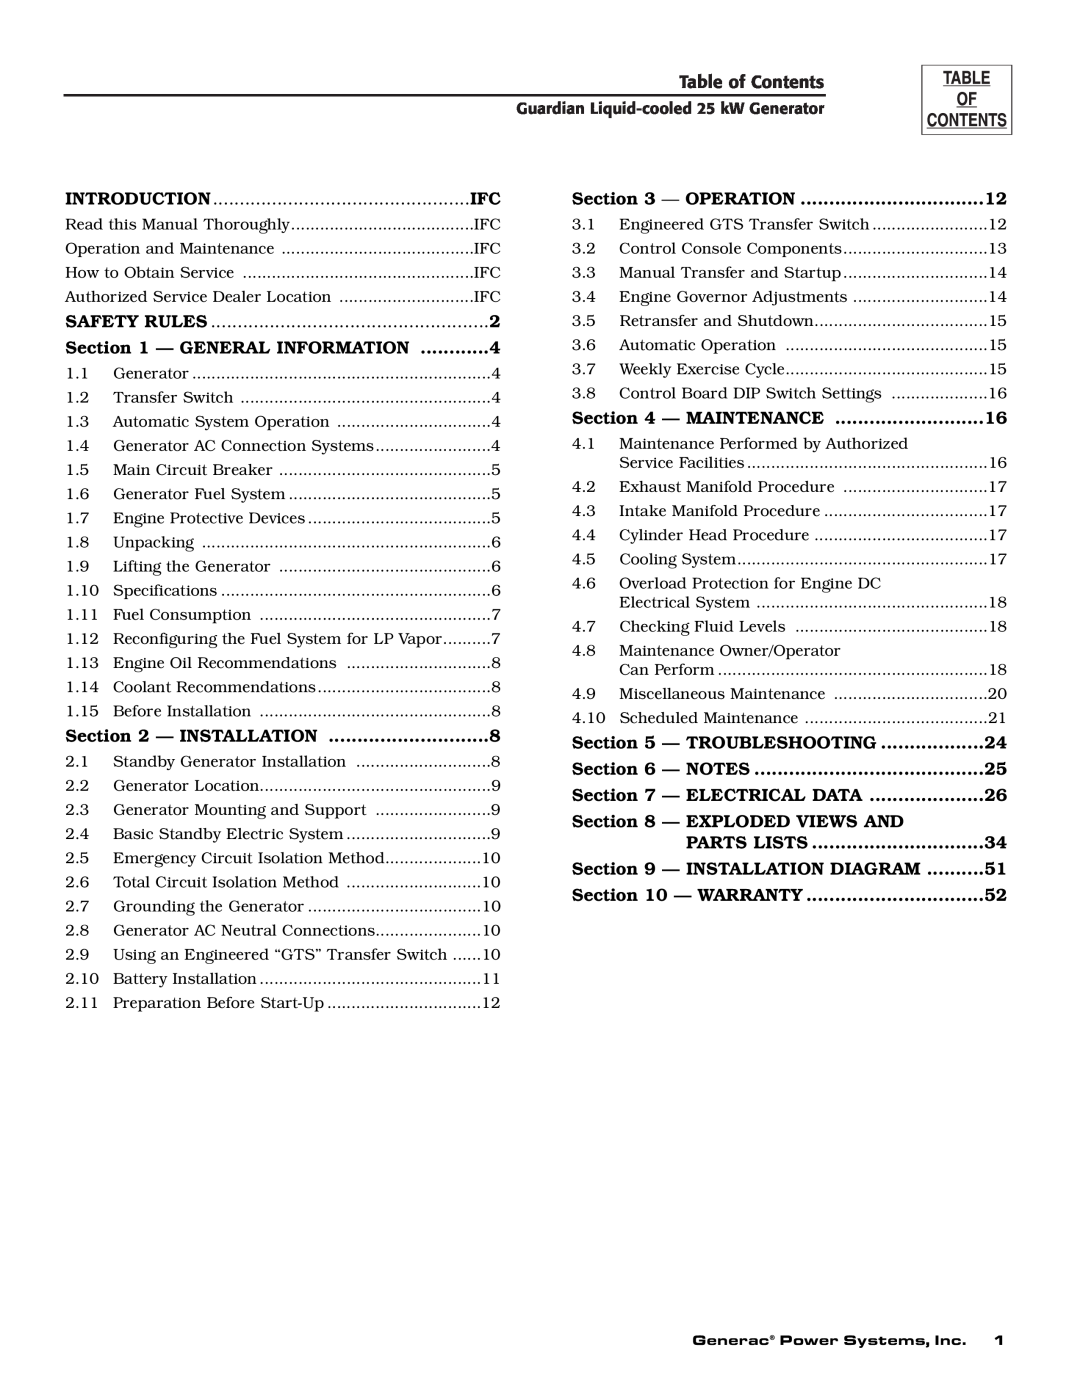 Generac Power Systems 005040-0, 005040-1, 005053-0, 005053-1, 005054-0, 005054-1 Table of Contents, Introduction 